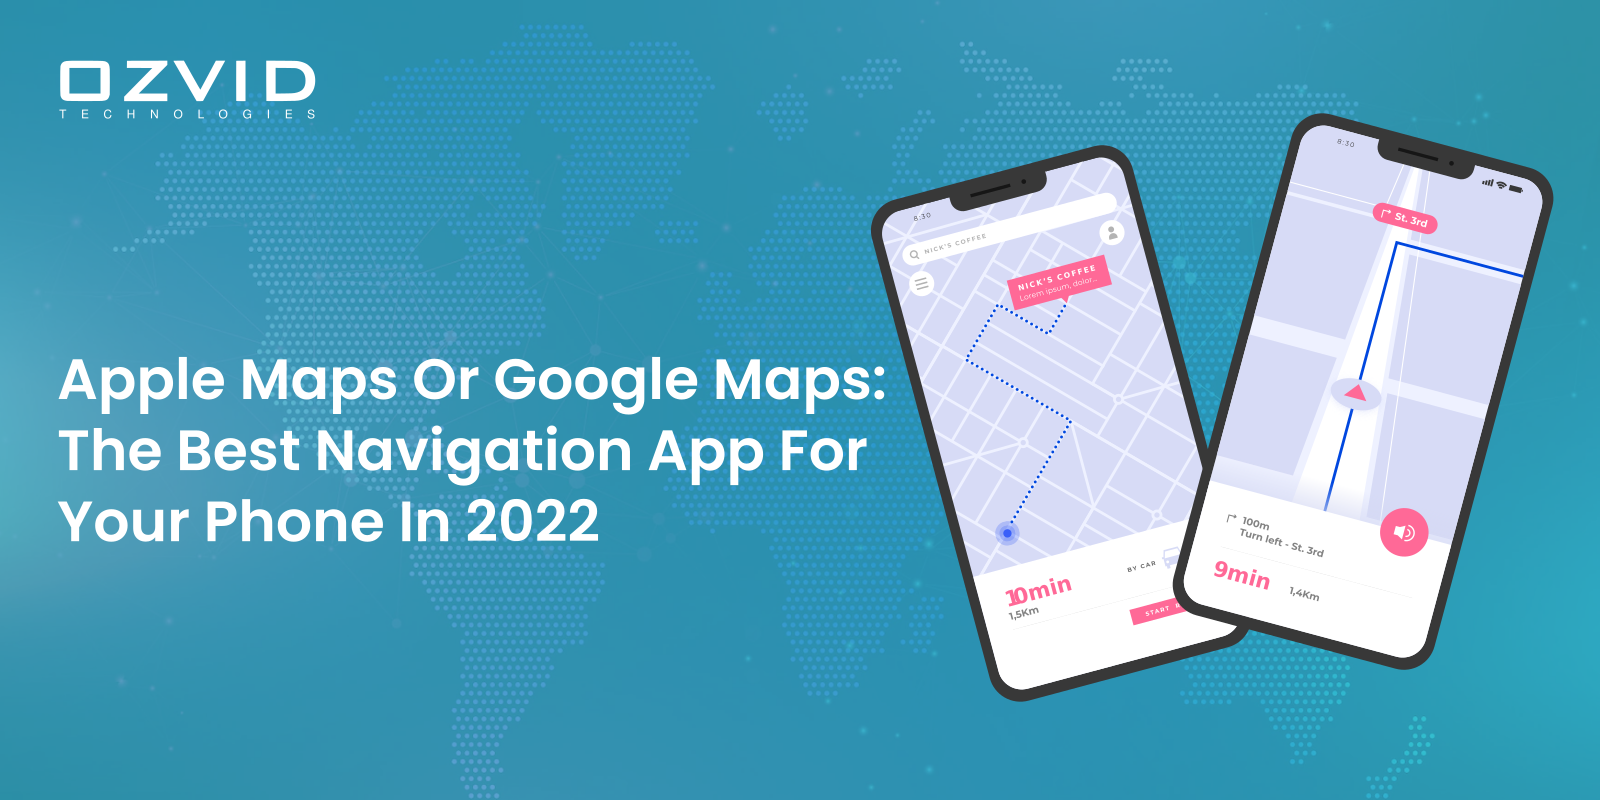 Apple Maps Or Google Maps: The Best Navigation App For Your Phone In 2022